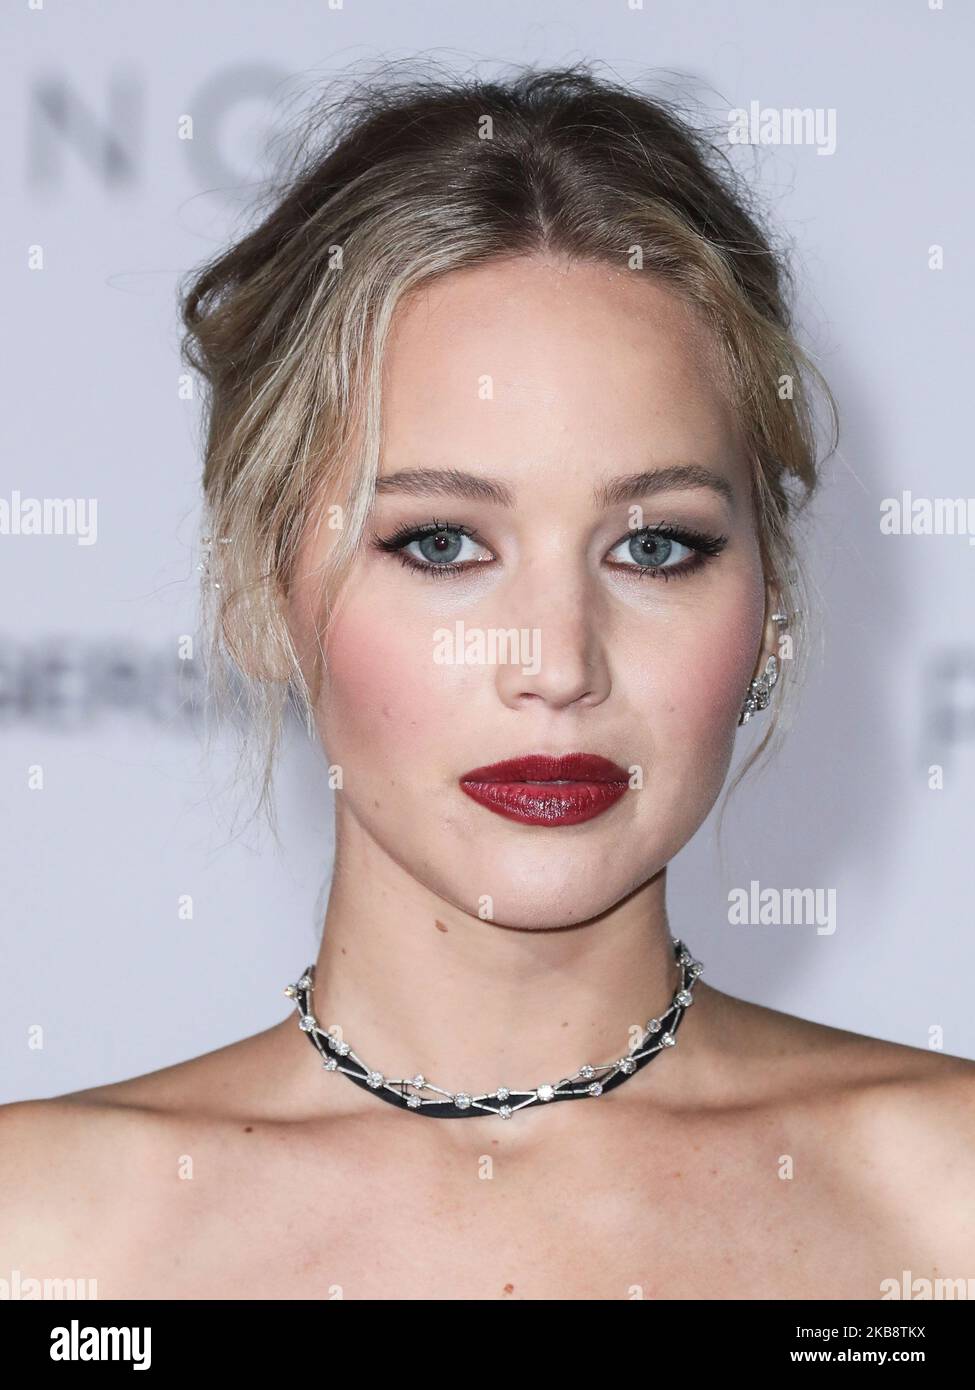 (FILE) Jennifer Lawrence marries Cooke Maroney. Jennifer Lawrence and Cooke Maroney tied the knot Saturday night at Belcourt of Newport, a pretty spectacular Rhode Island mansion. Among the guests were Ashley Olsen, Kris Jenner, Emma Stone, Corey Gamble, Cameron Diaz, Nicole Richie and Sienna Miller. WESTWOOD, LOS ANGELES, CALIFORNIA, USA - DECEMBER 14: Actress Jennifer Lawrence wearing a Dior dress, Christian Louboutin, and Beladora and Repossi jewels arrives at the World Premiere Of Columbia Pictures 'Passengers' held at the Regency Village Theatre on December 14, 2016 in Westwood, Los Angel Stock Photo